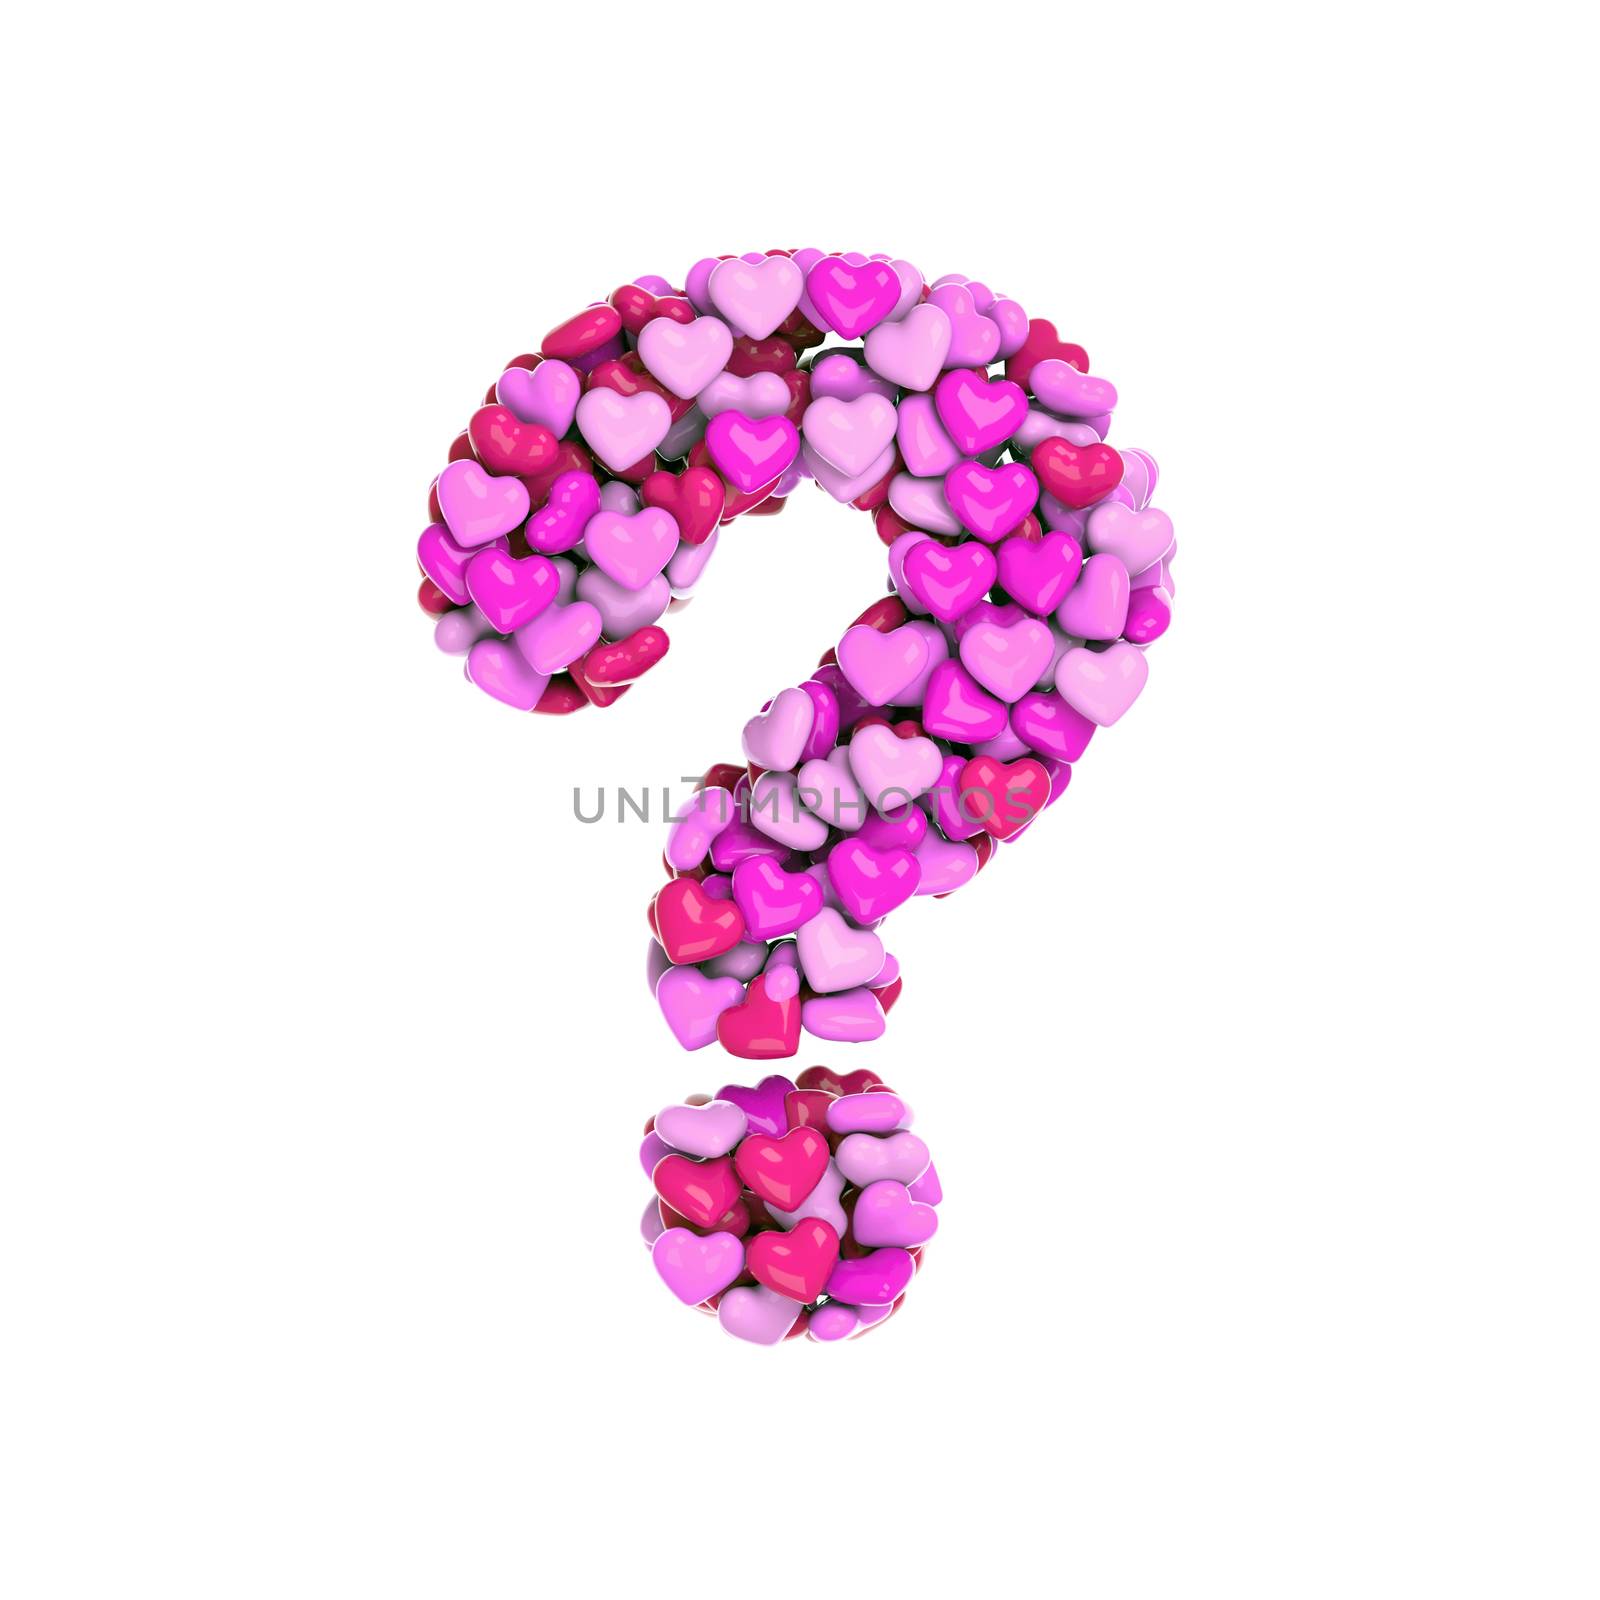 Valentine interrogation point - 3d pink hearts symbol - Love, passion or wedding concept by chrisroll